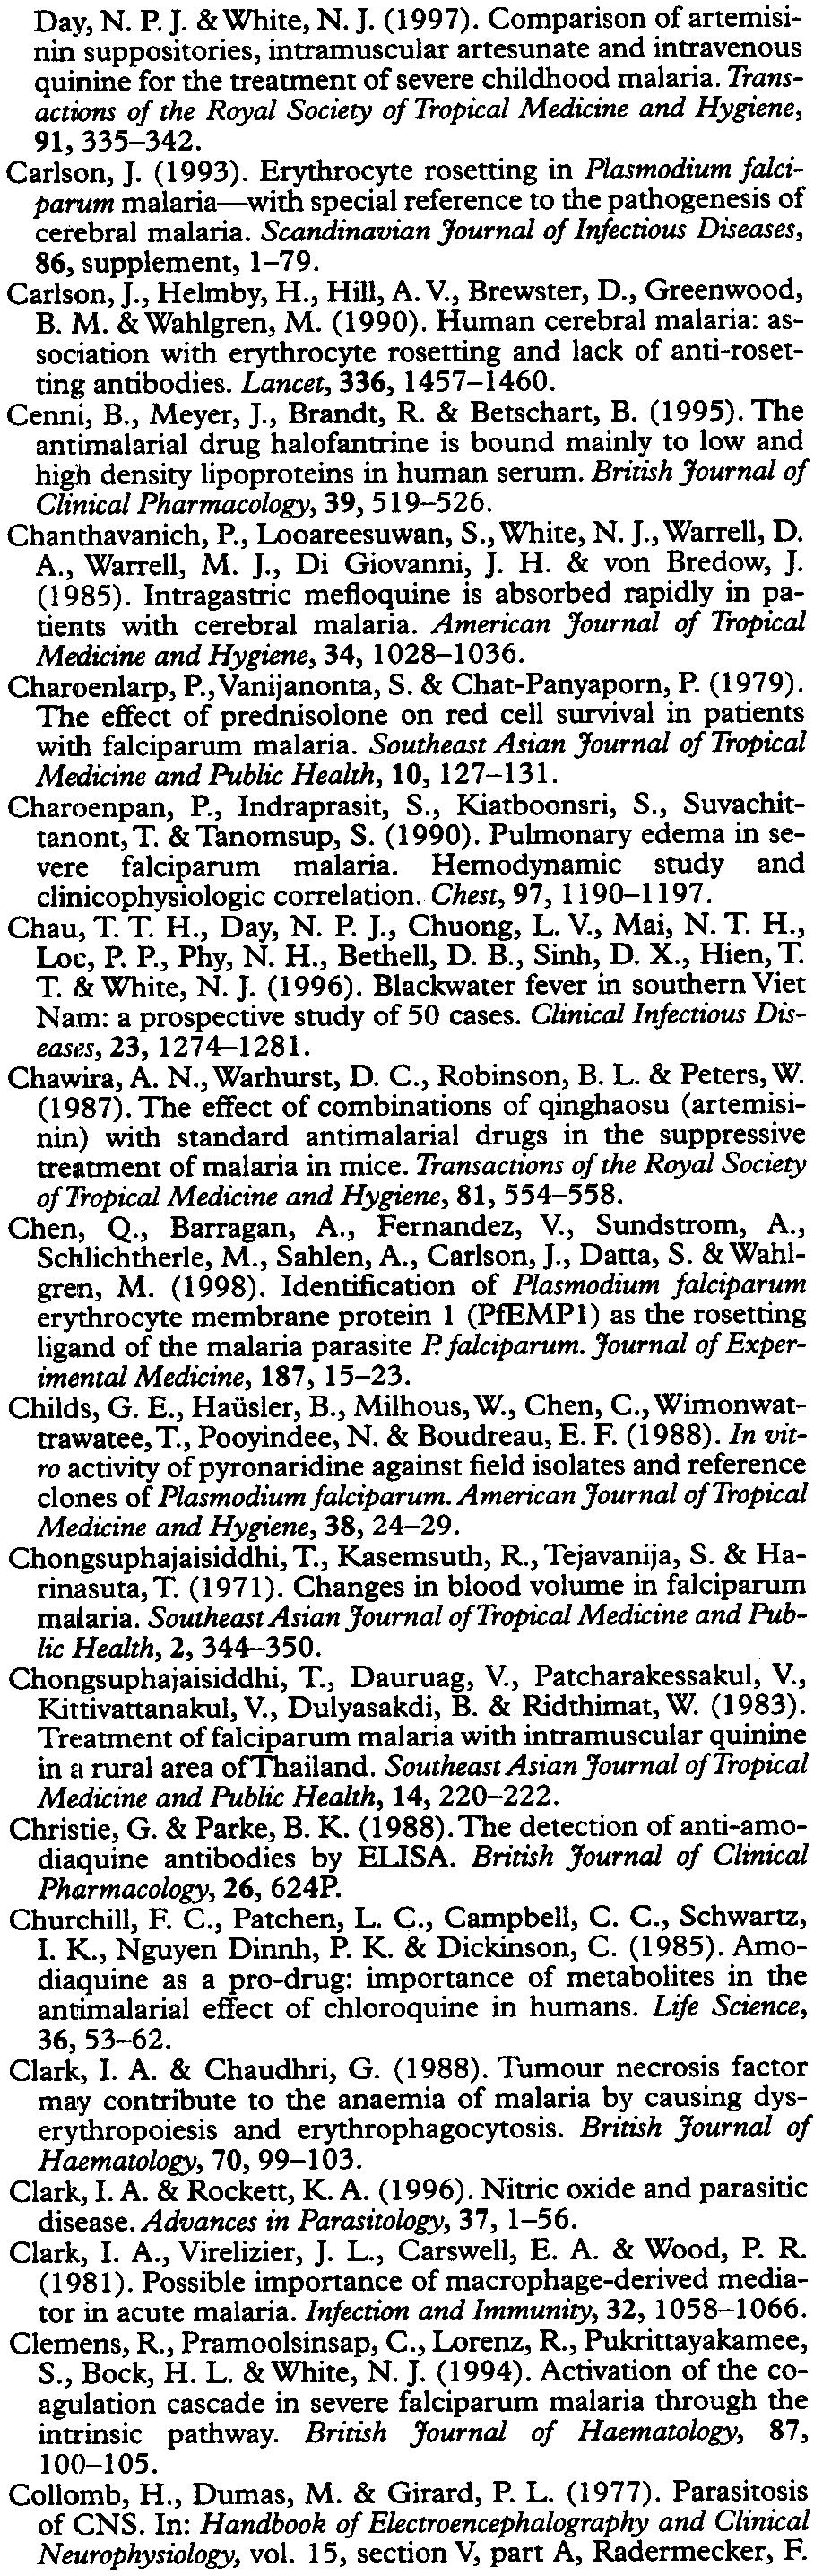 Transactions of the Royal Society of Tropical Medicine and Hygiene, 91,335-342. Carlson, I. (1993).